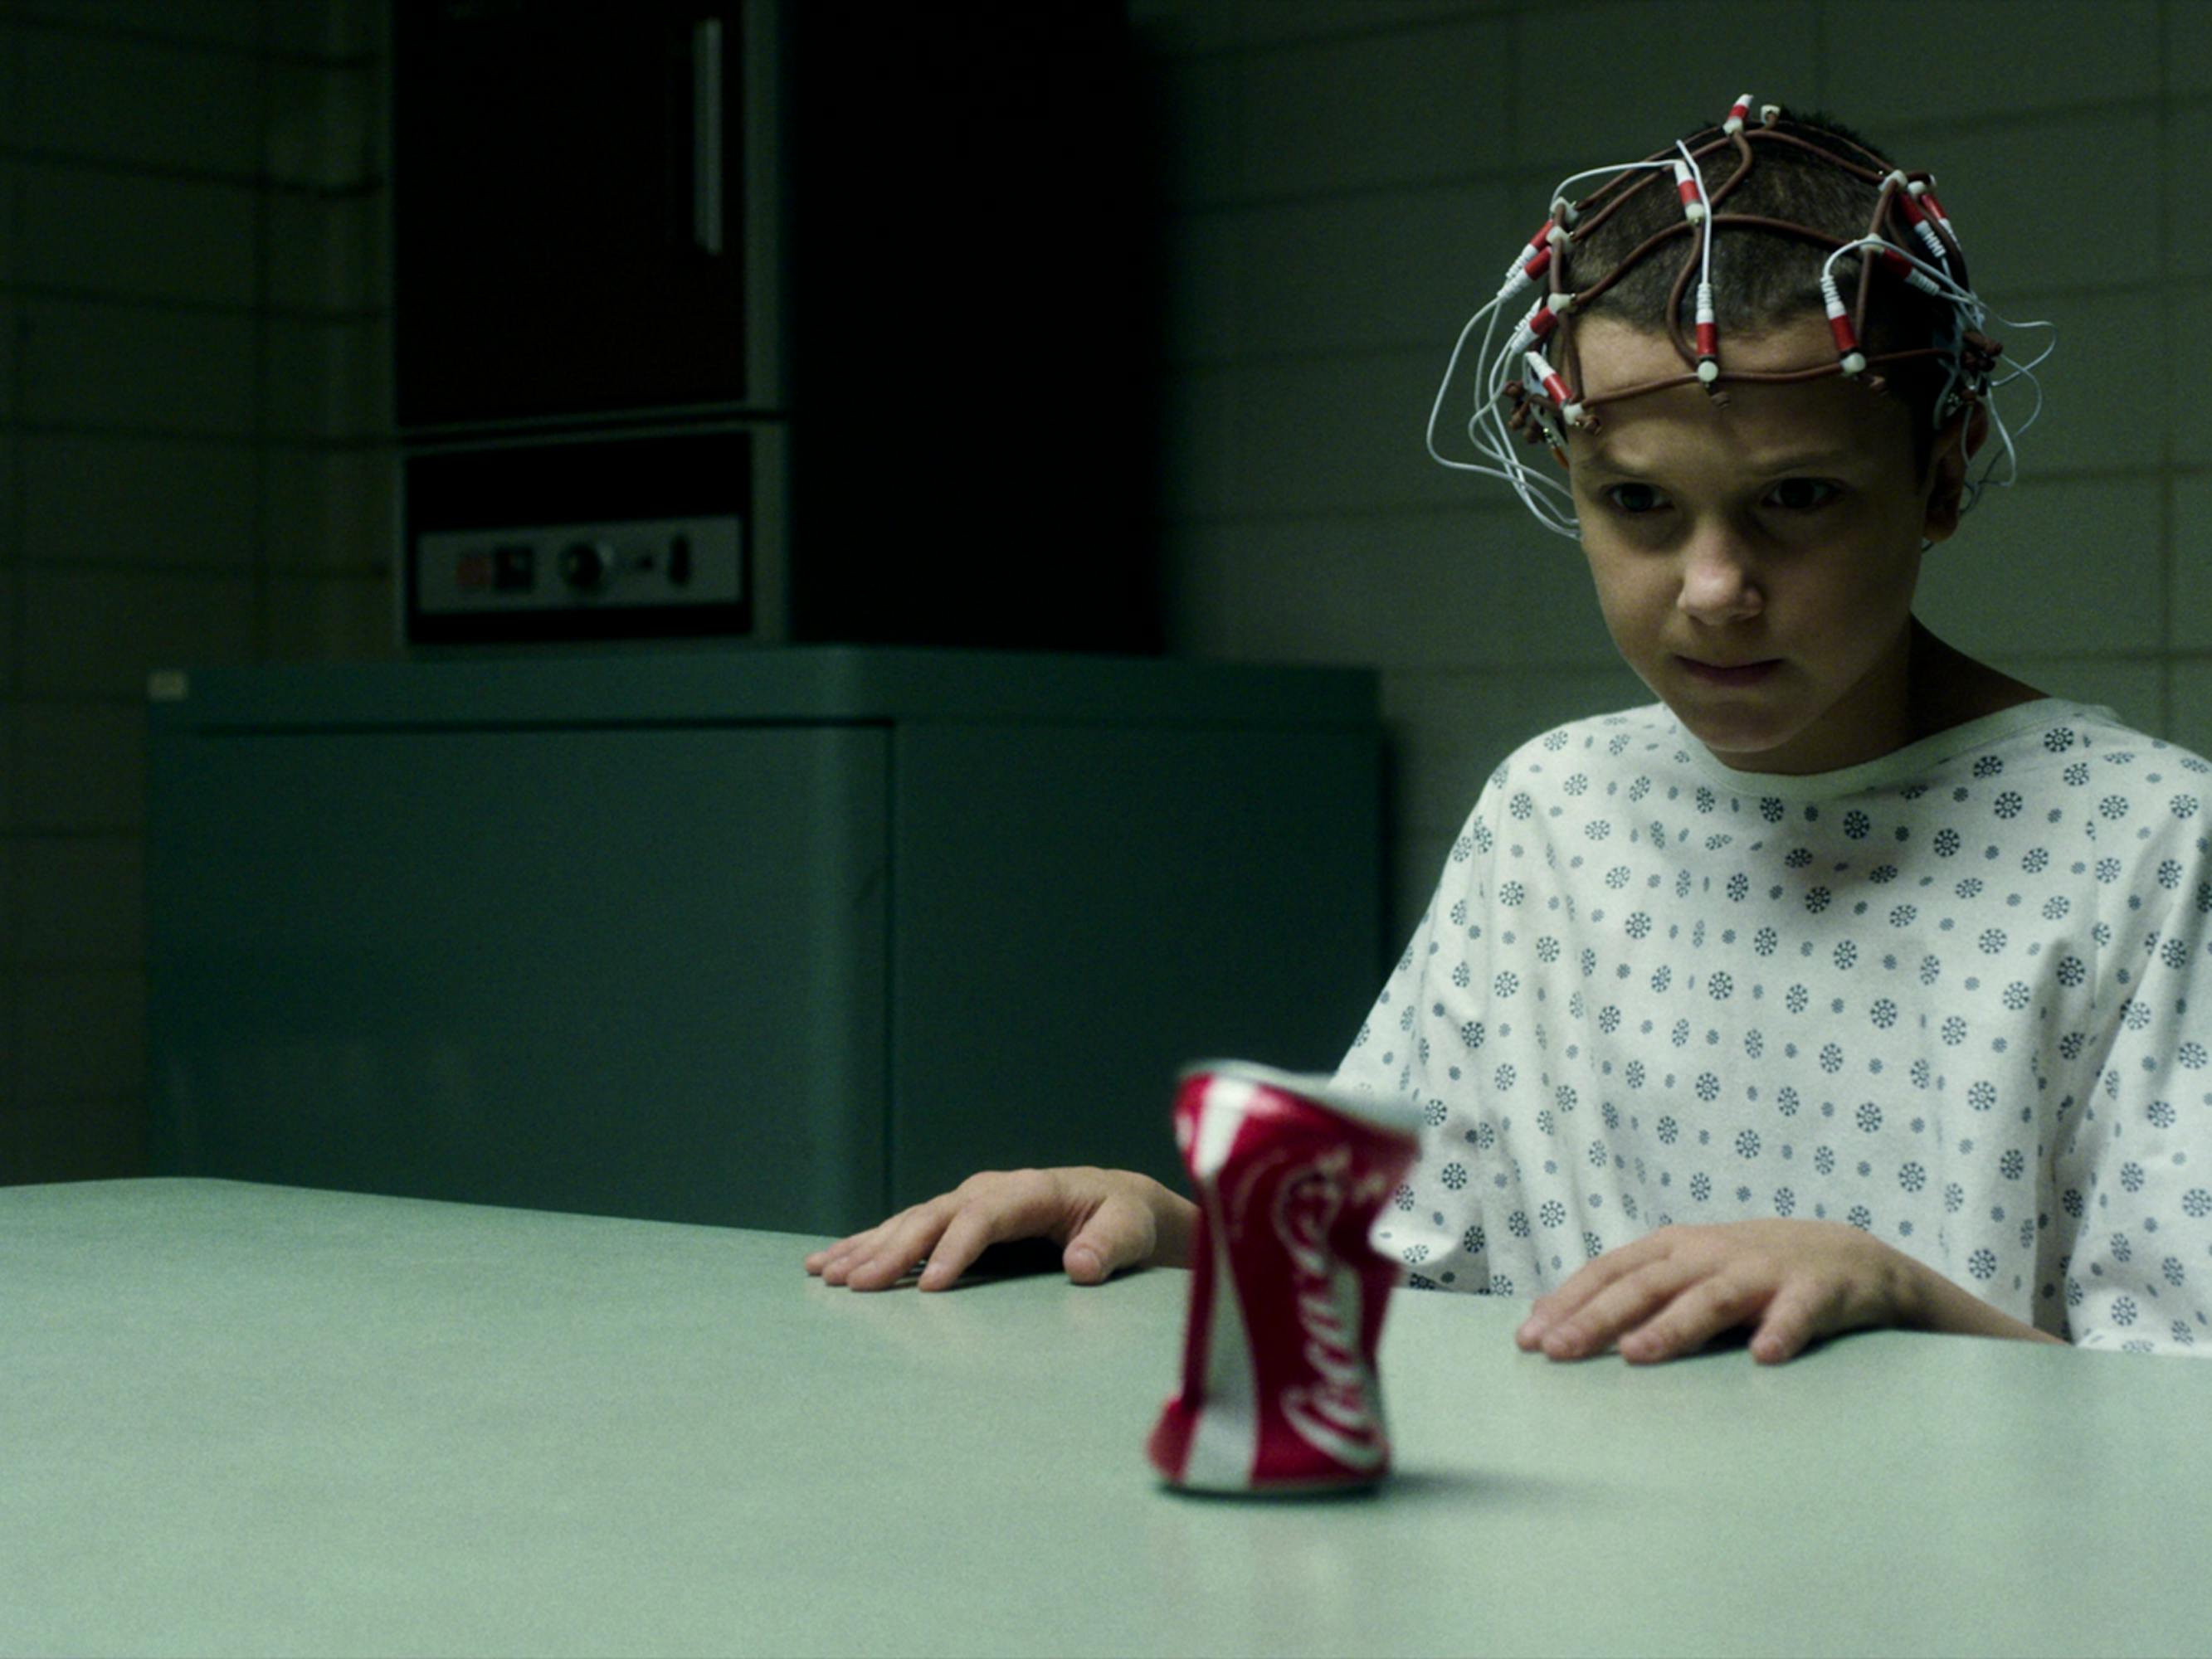 Eleven (Millie Bobby Brown) wears a hospital gown with wires on her head. She stares at a crumpled can of coke.